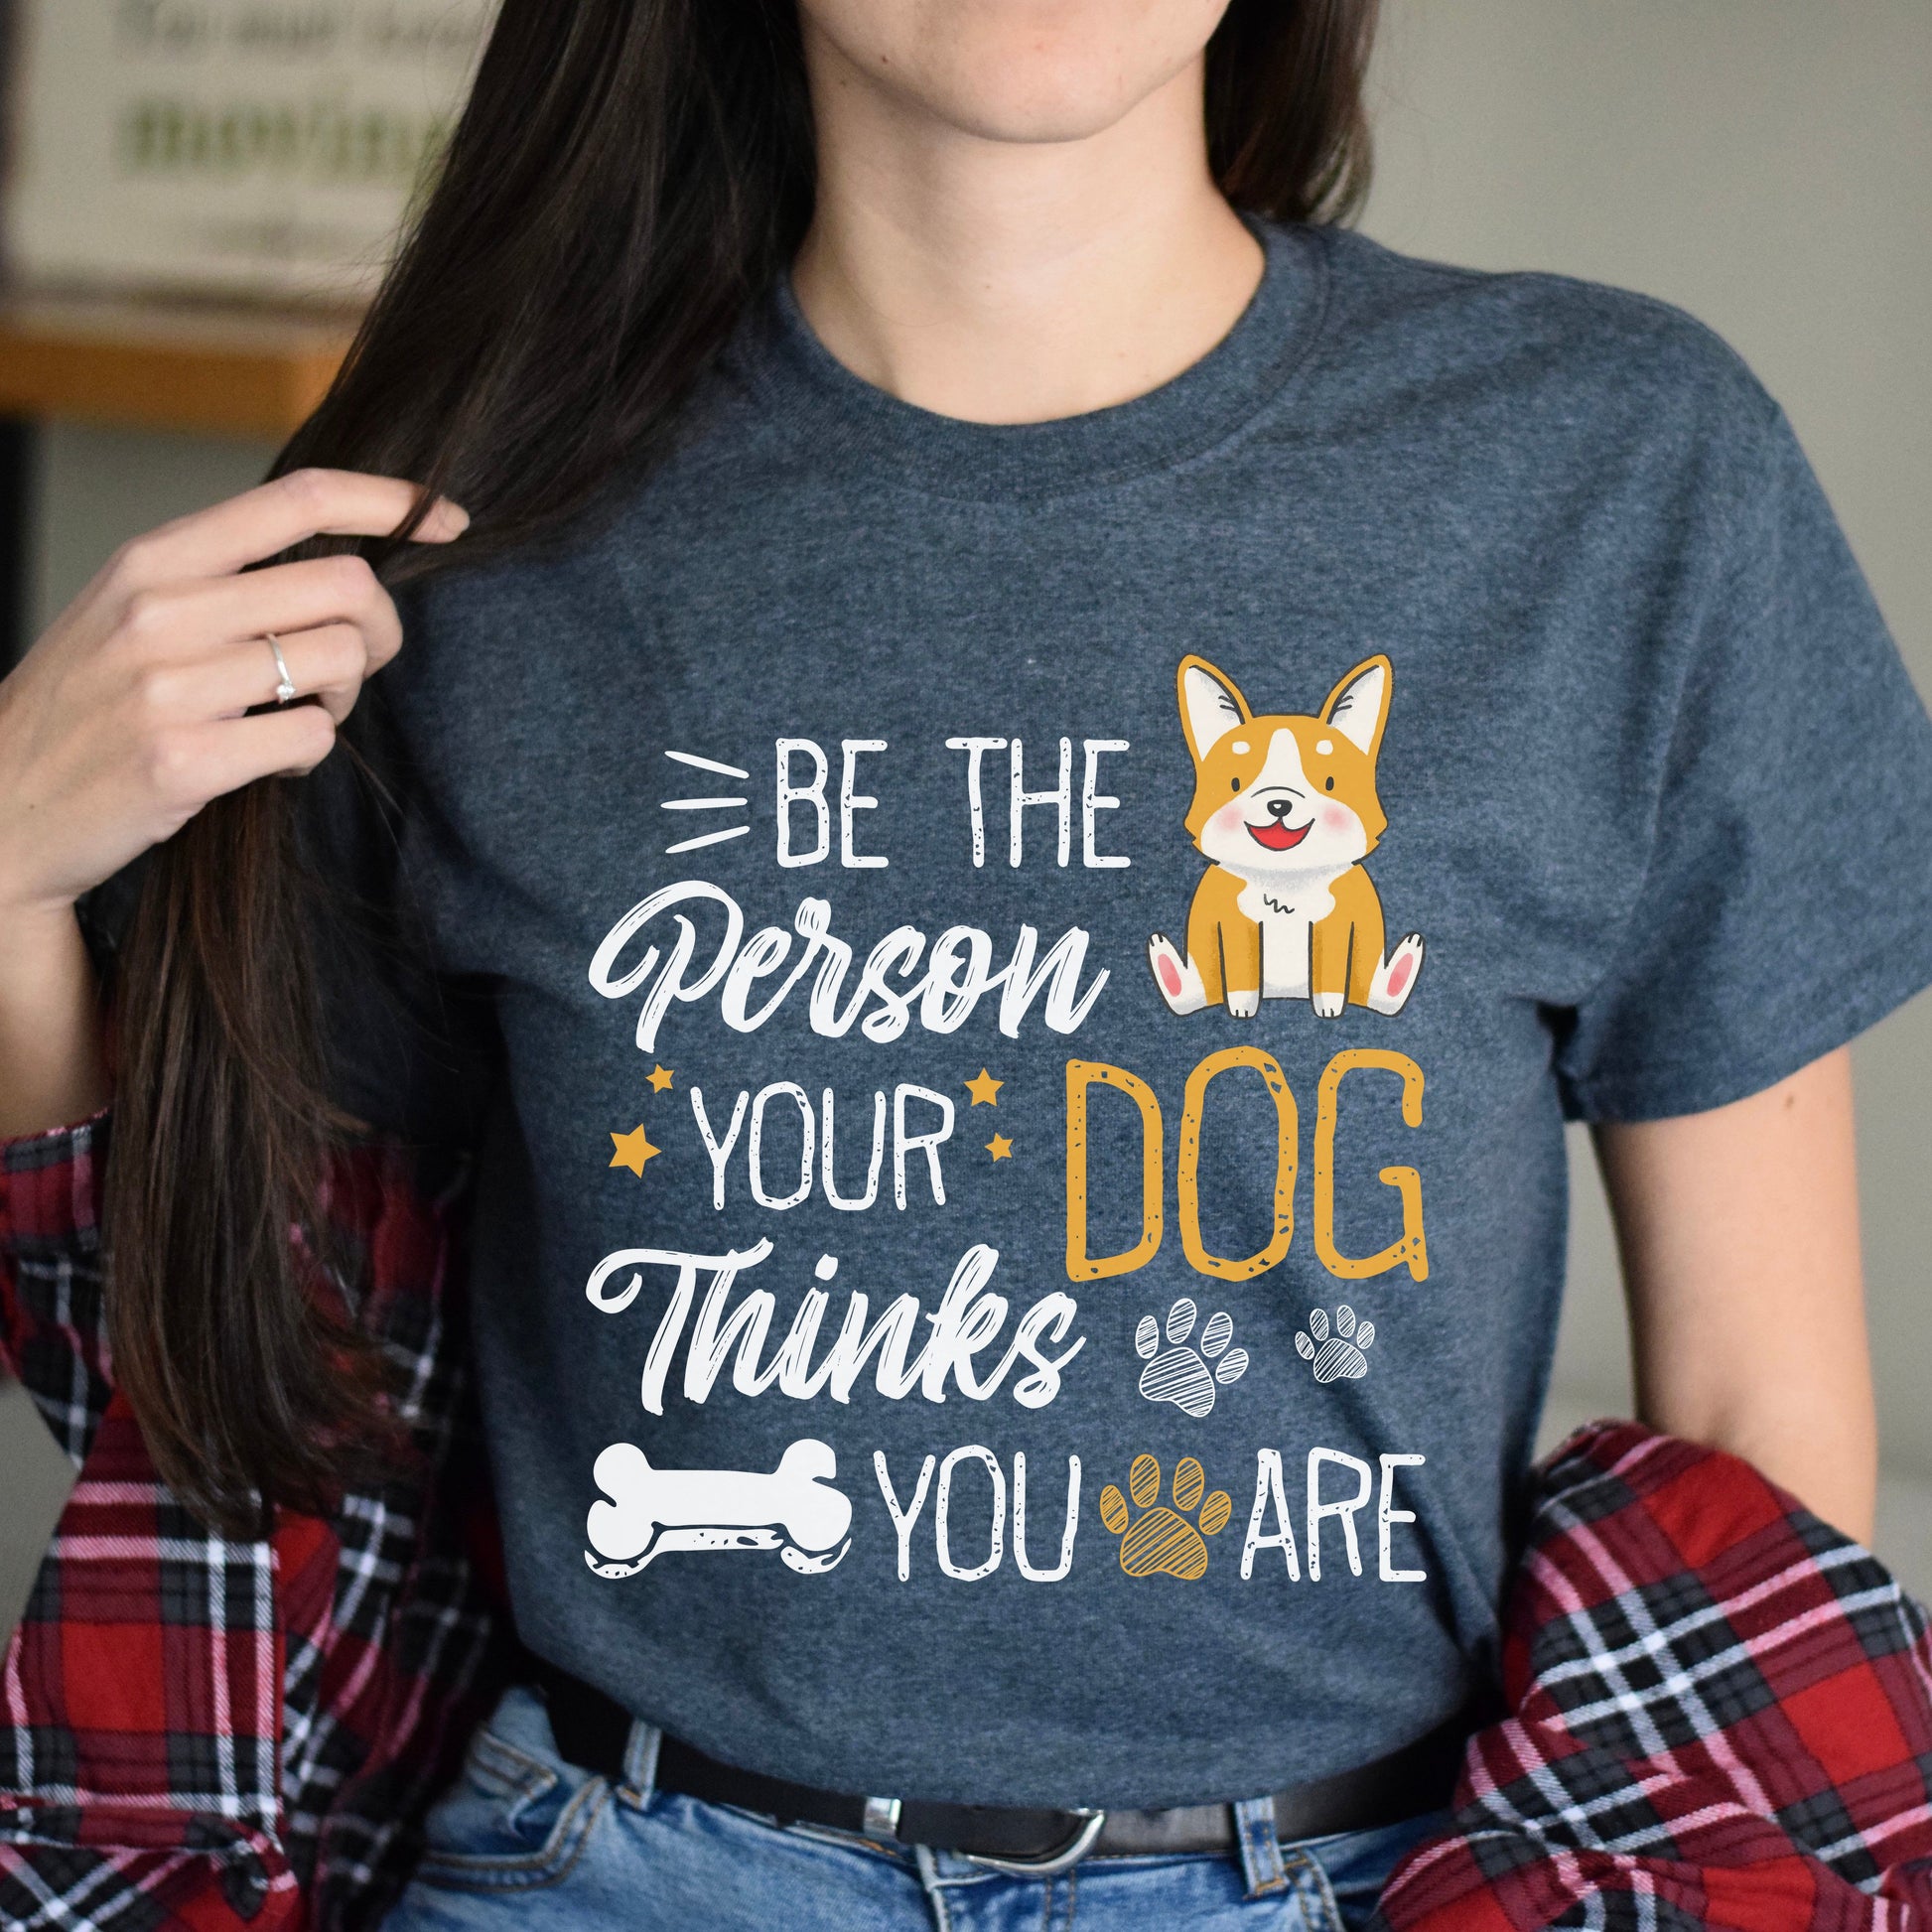 Be the person your dog thinks you are Unisex t-shirt gift black navy dark heather-Dark Heather-Family-Gift-Planet